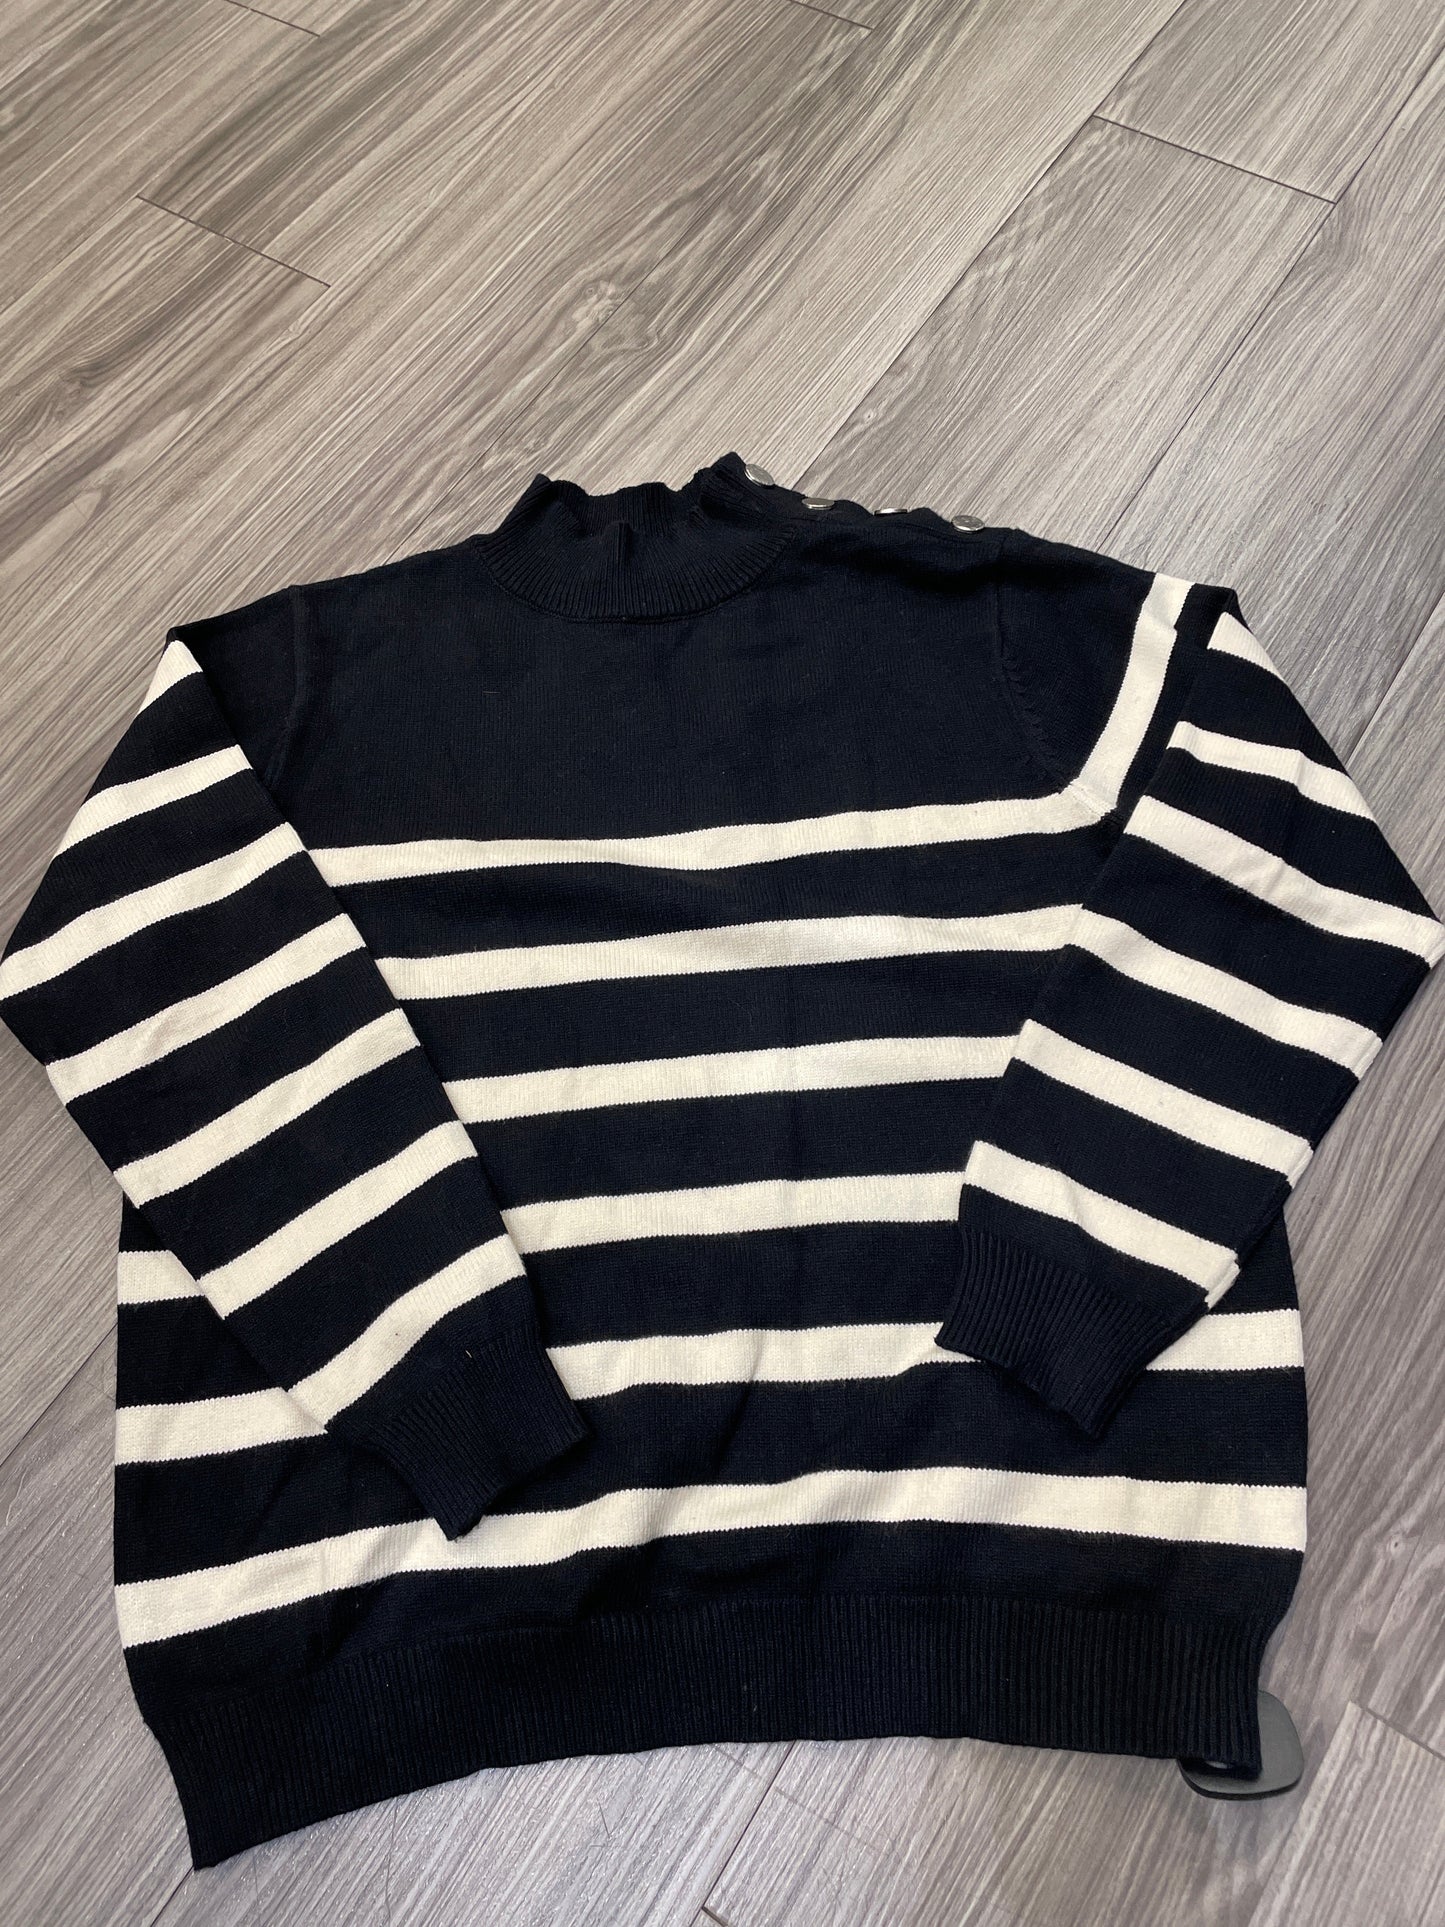 Striped Pattern Sweater Clothes Mentor, Size L